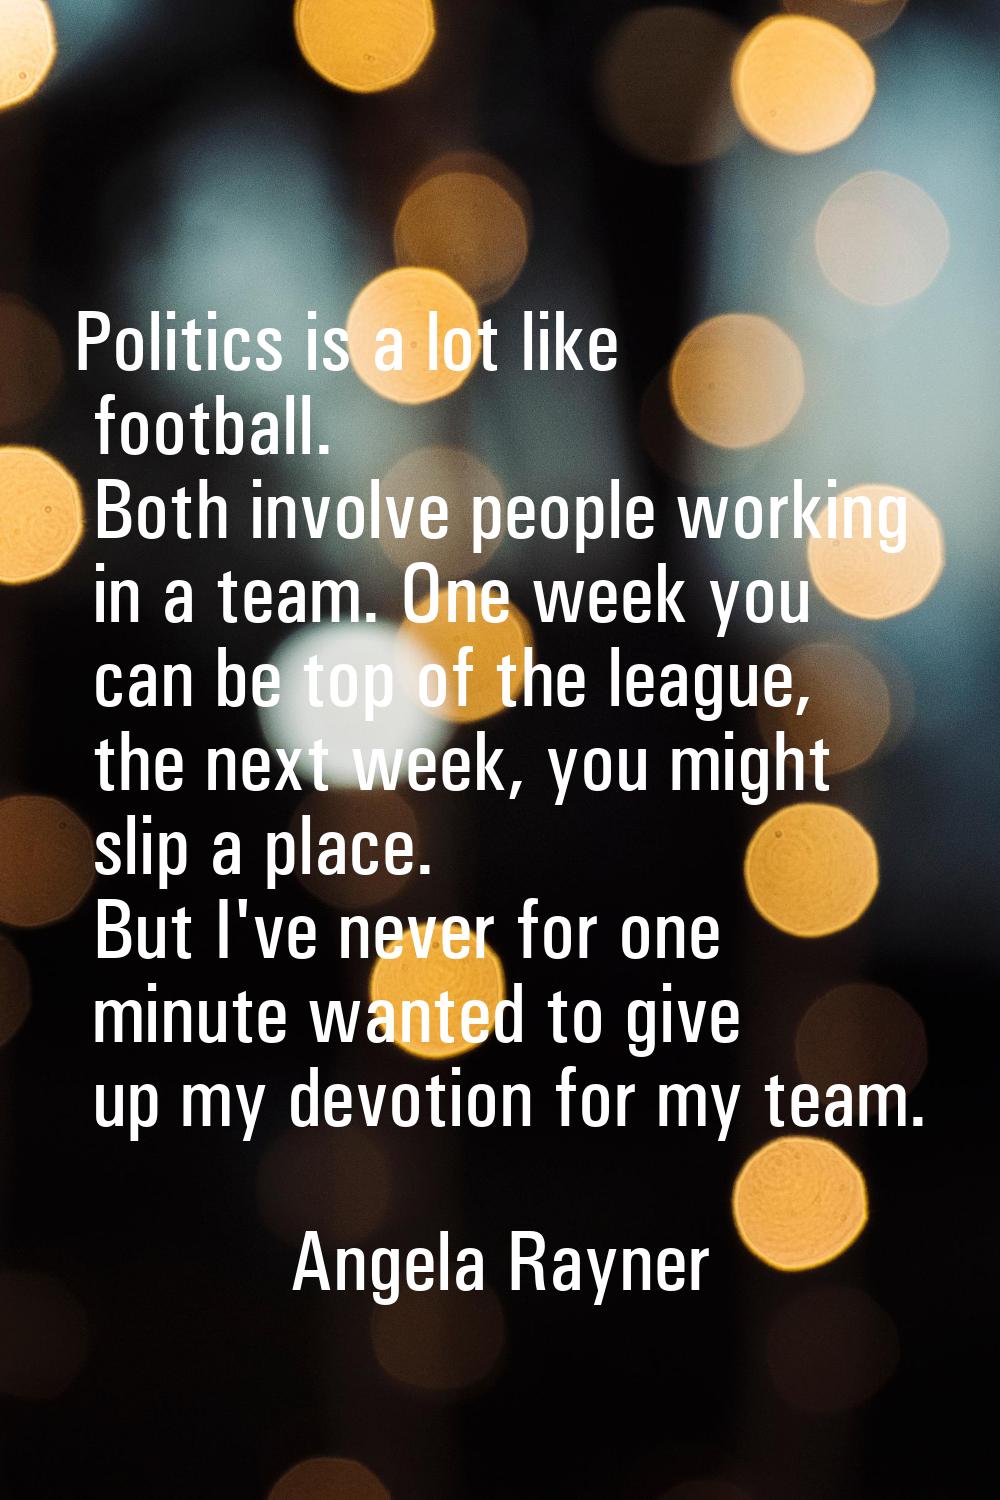 Politics is a lot like football. Both involve people working in a team. One week you can be top of 